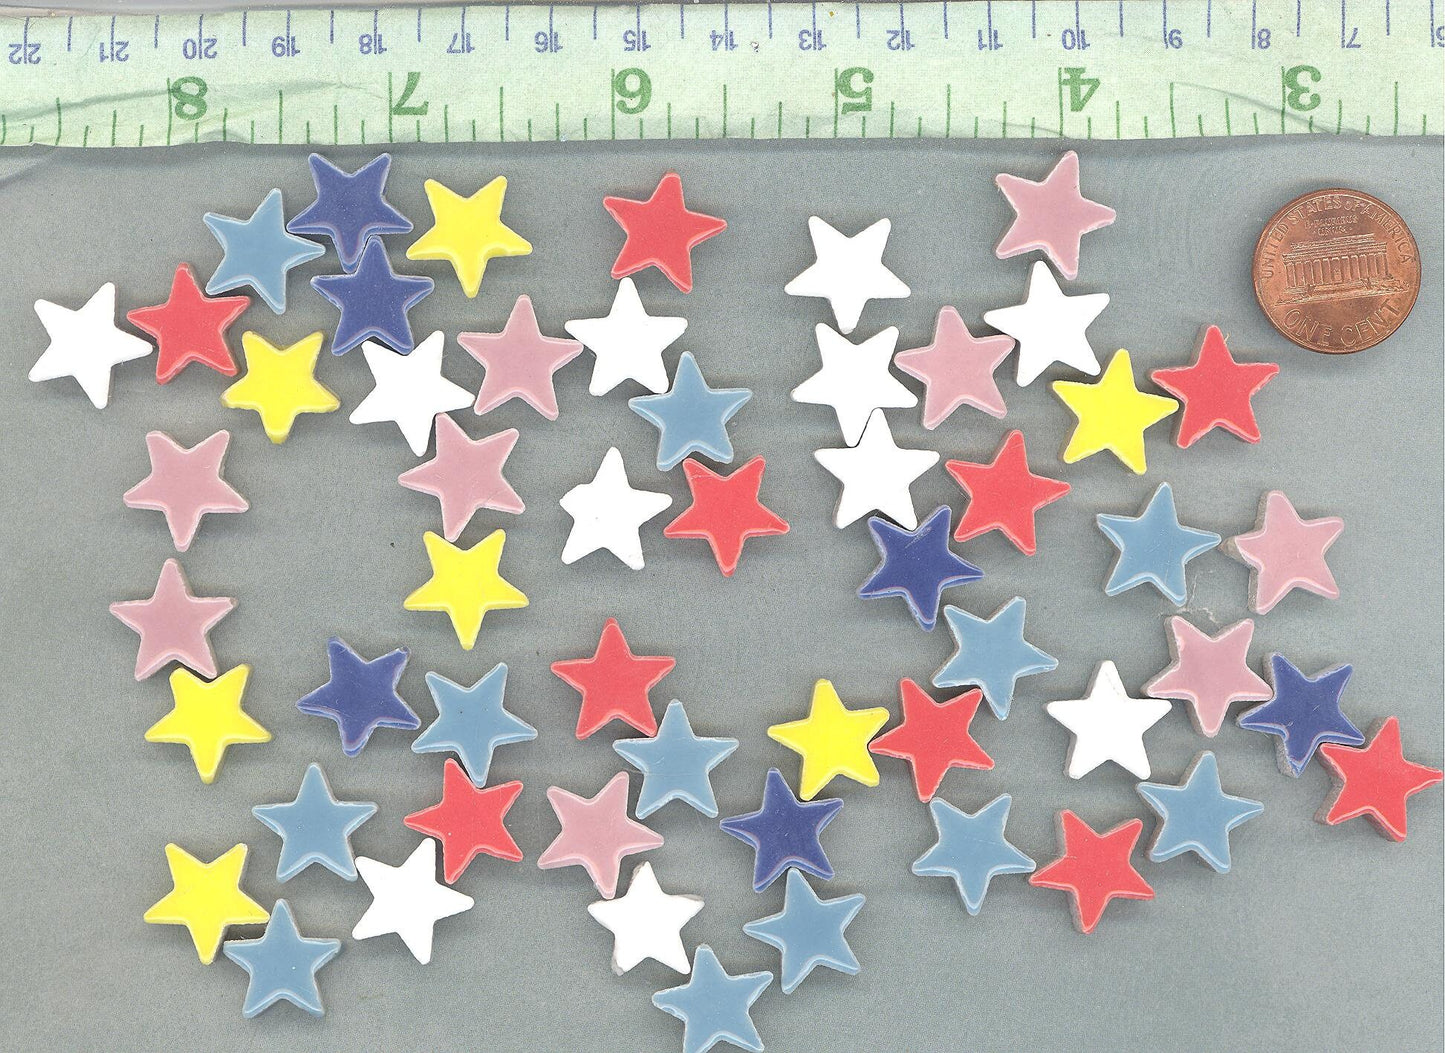 Bright Stars Mosaic Tiles - 50 Ceramic 3/4" Inch Tiles in Assorted Colors